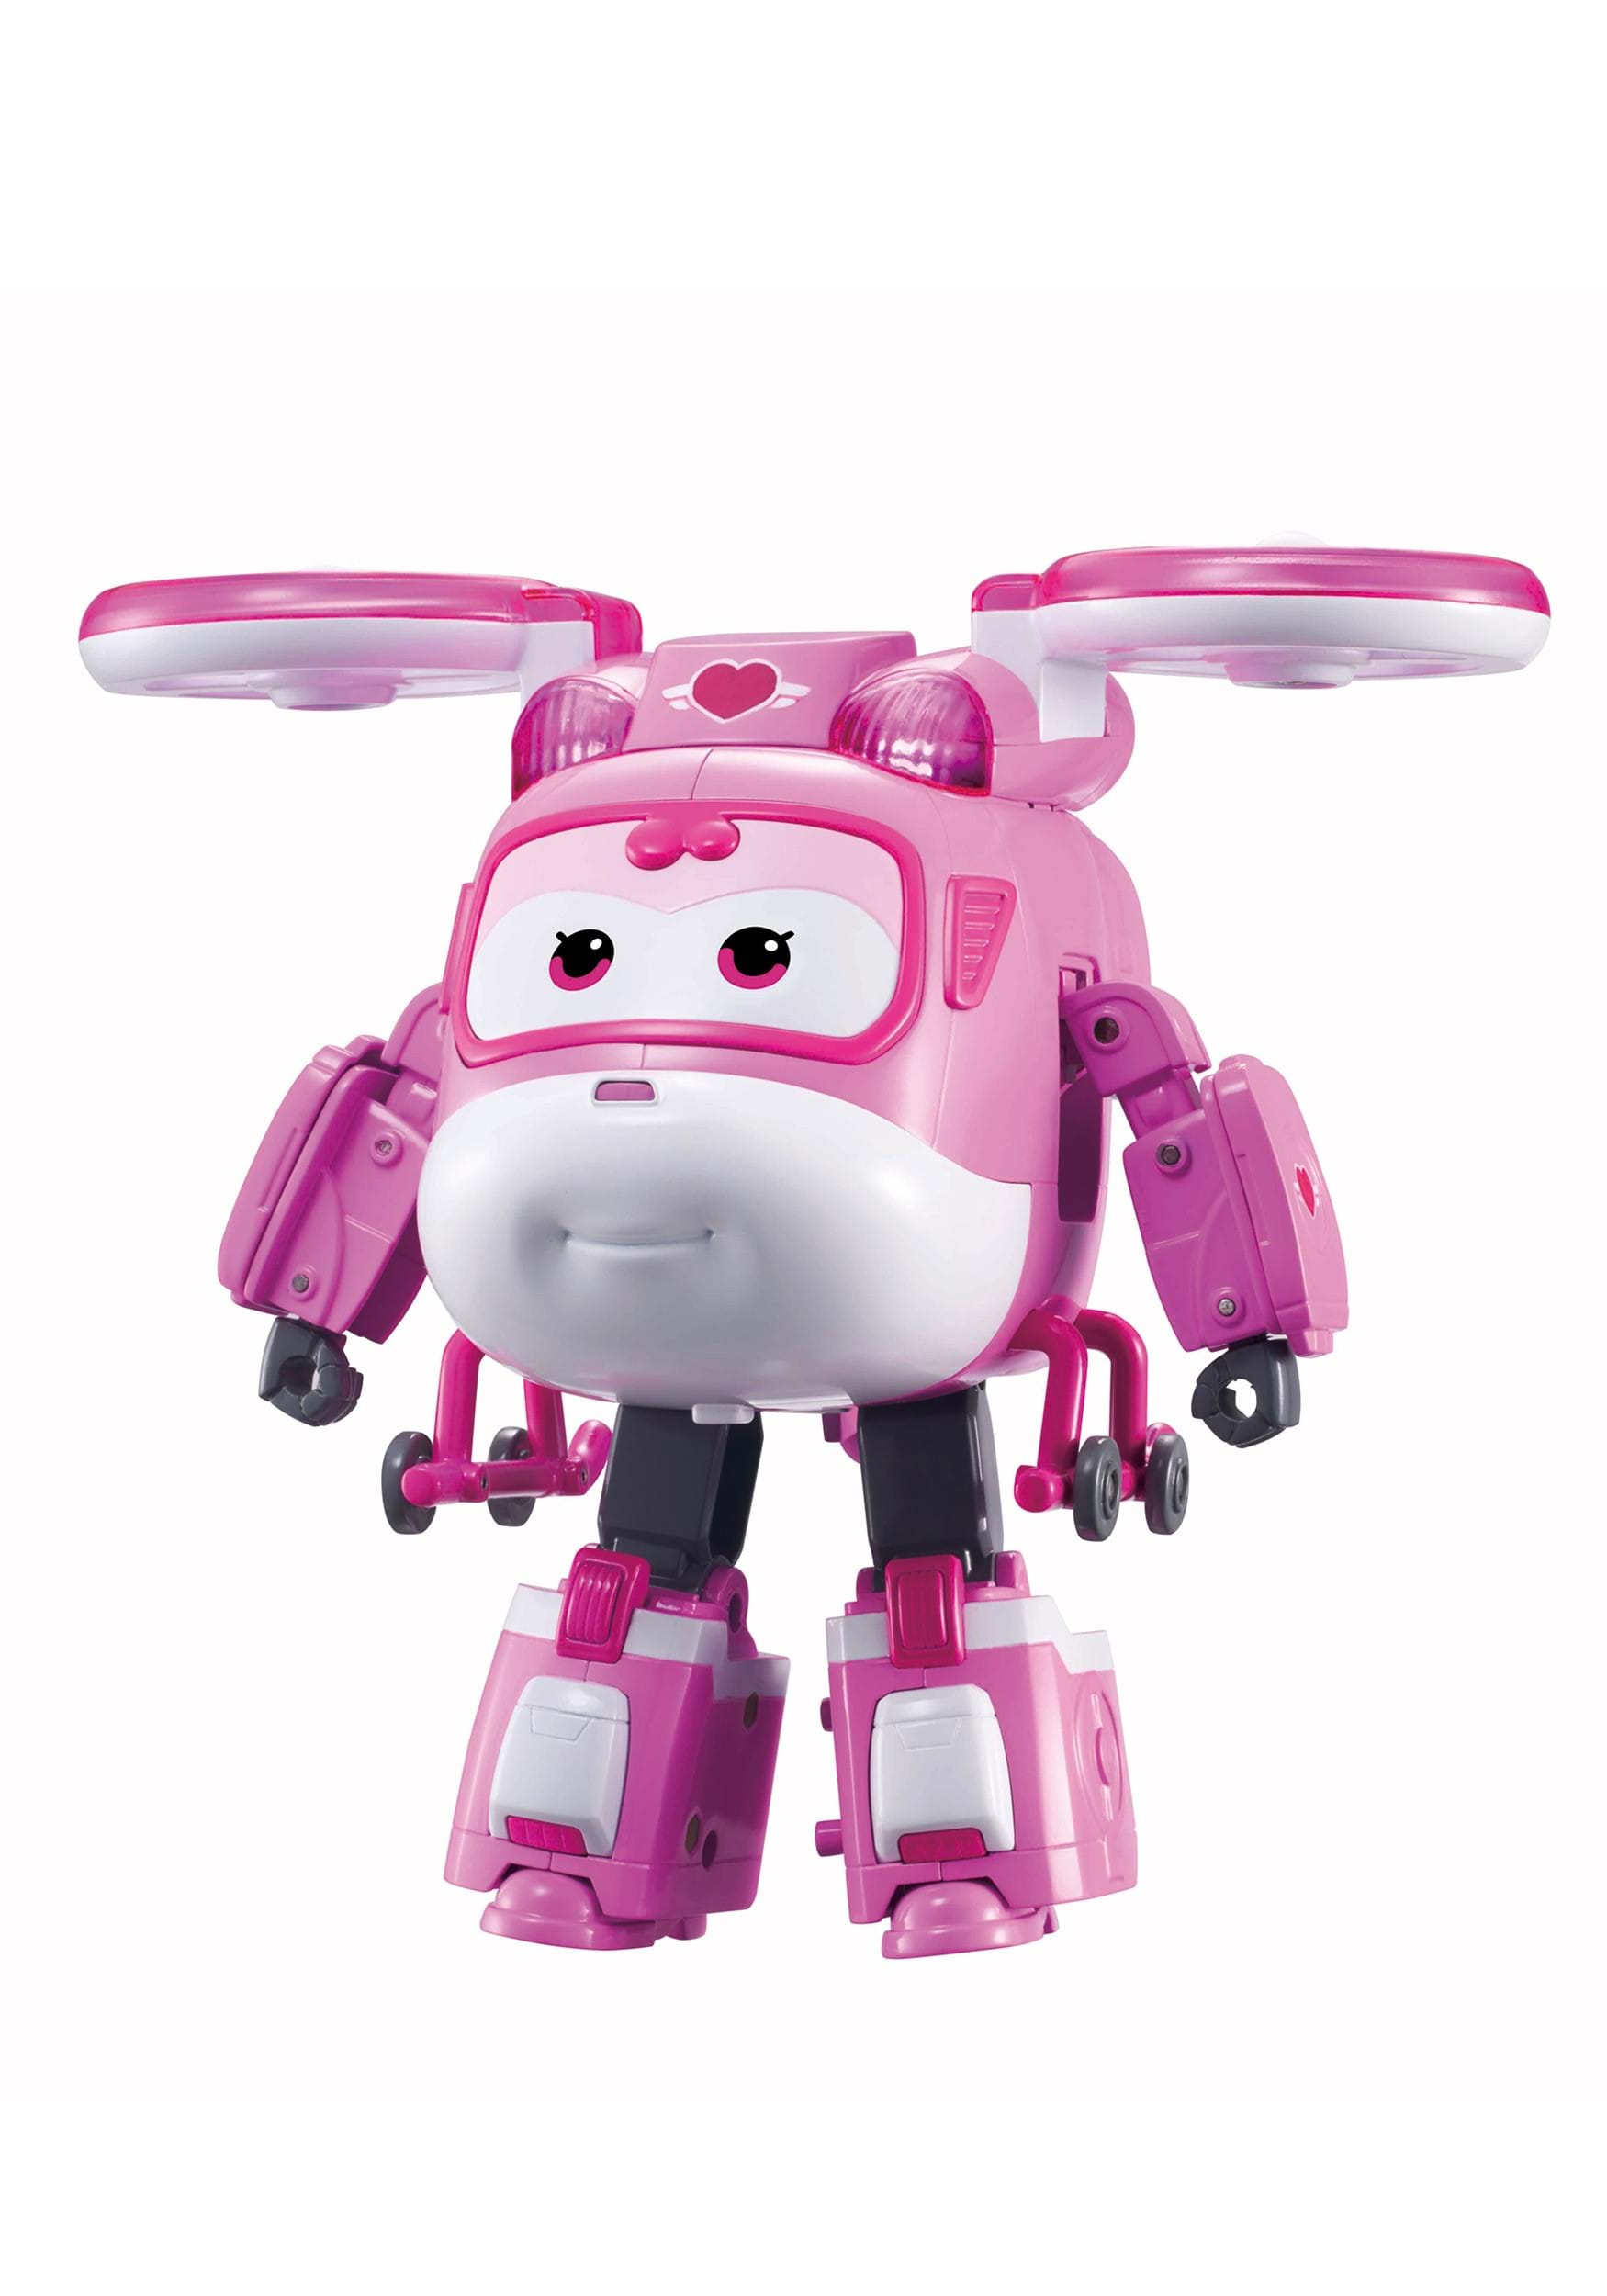 Deluxe Dizzy Transforming Figure from Super Wings